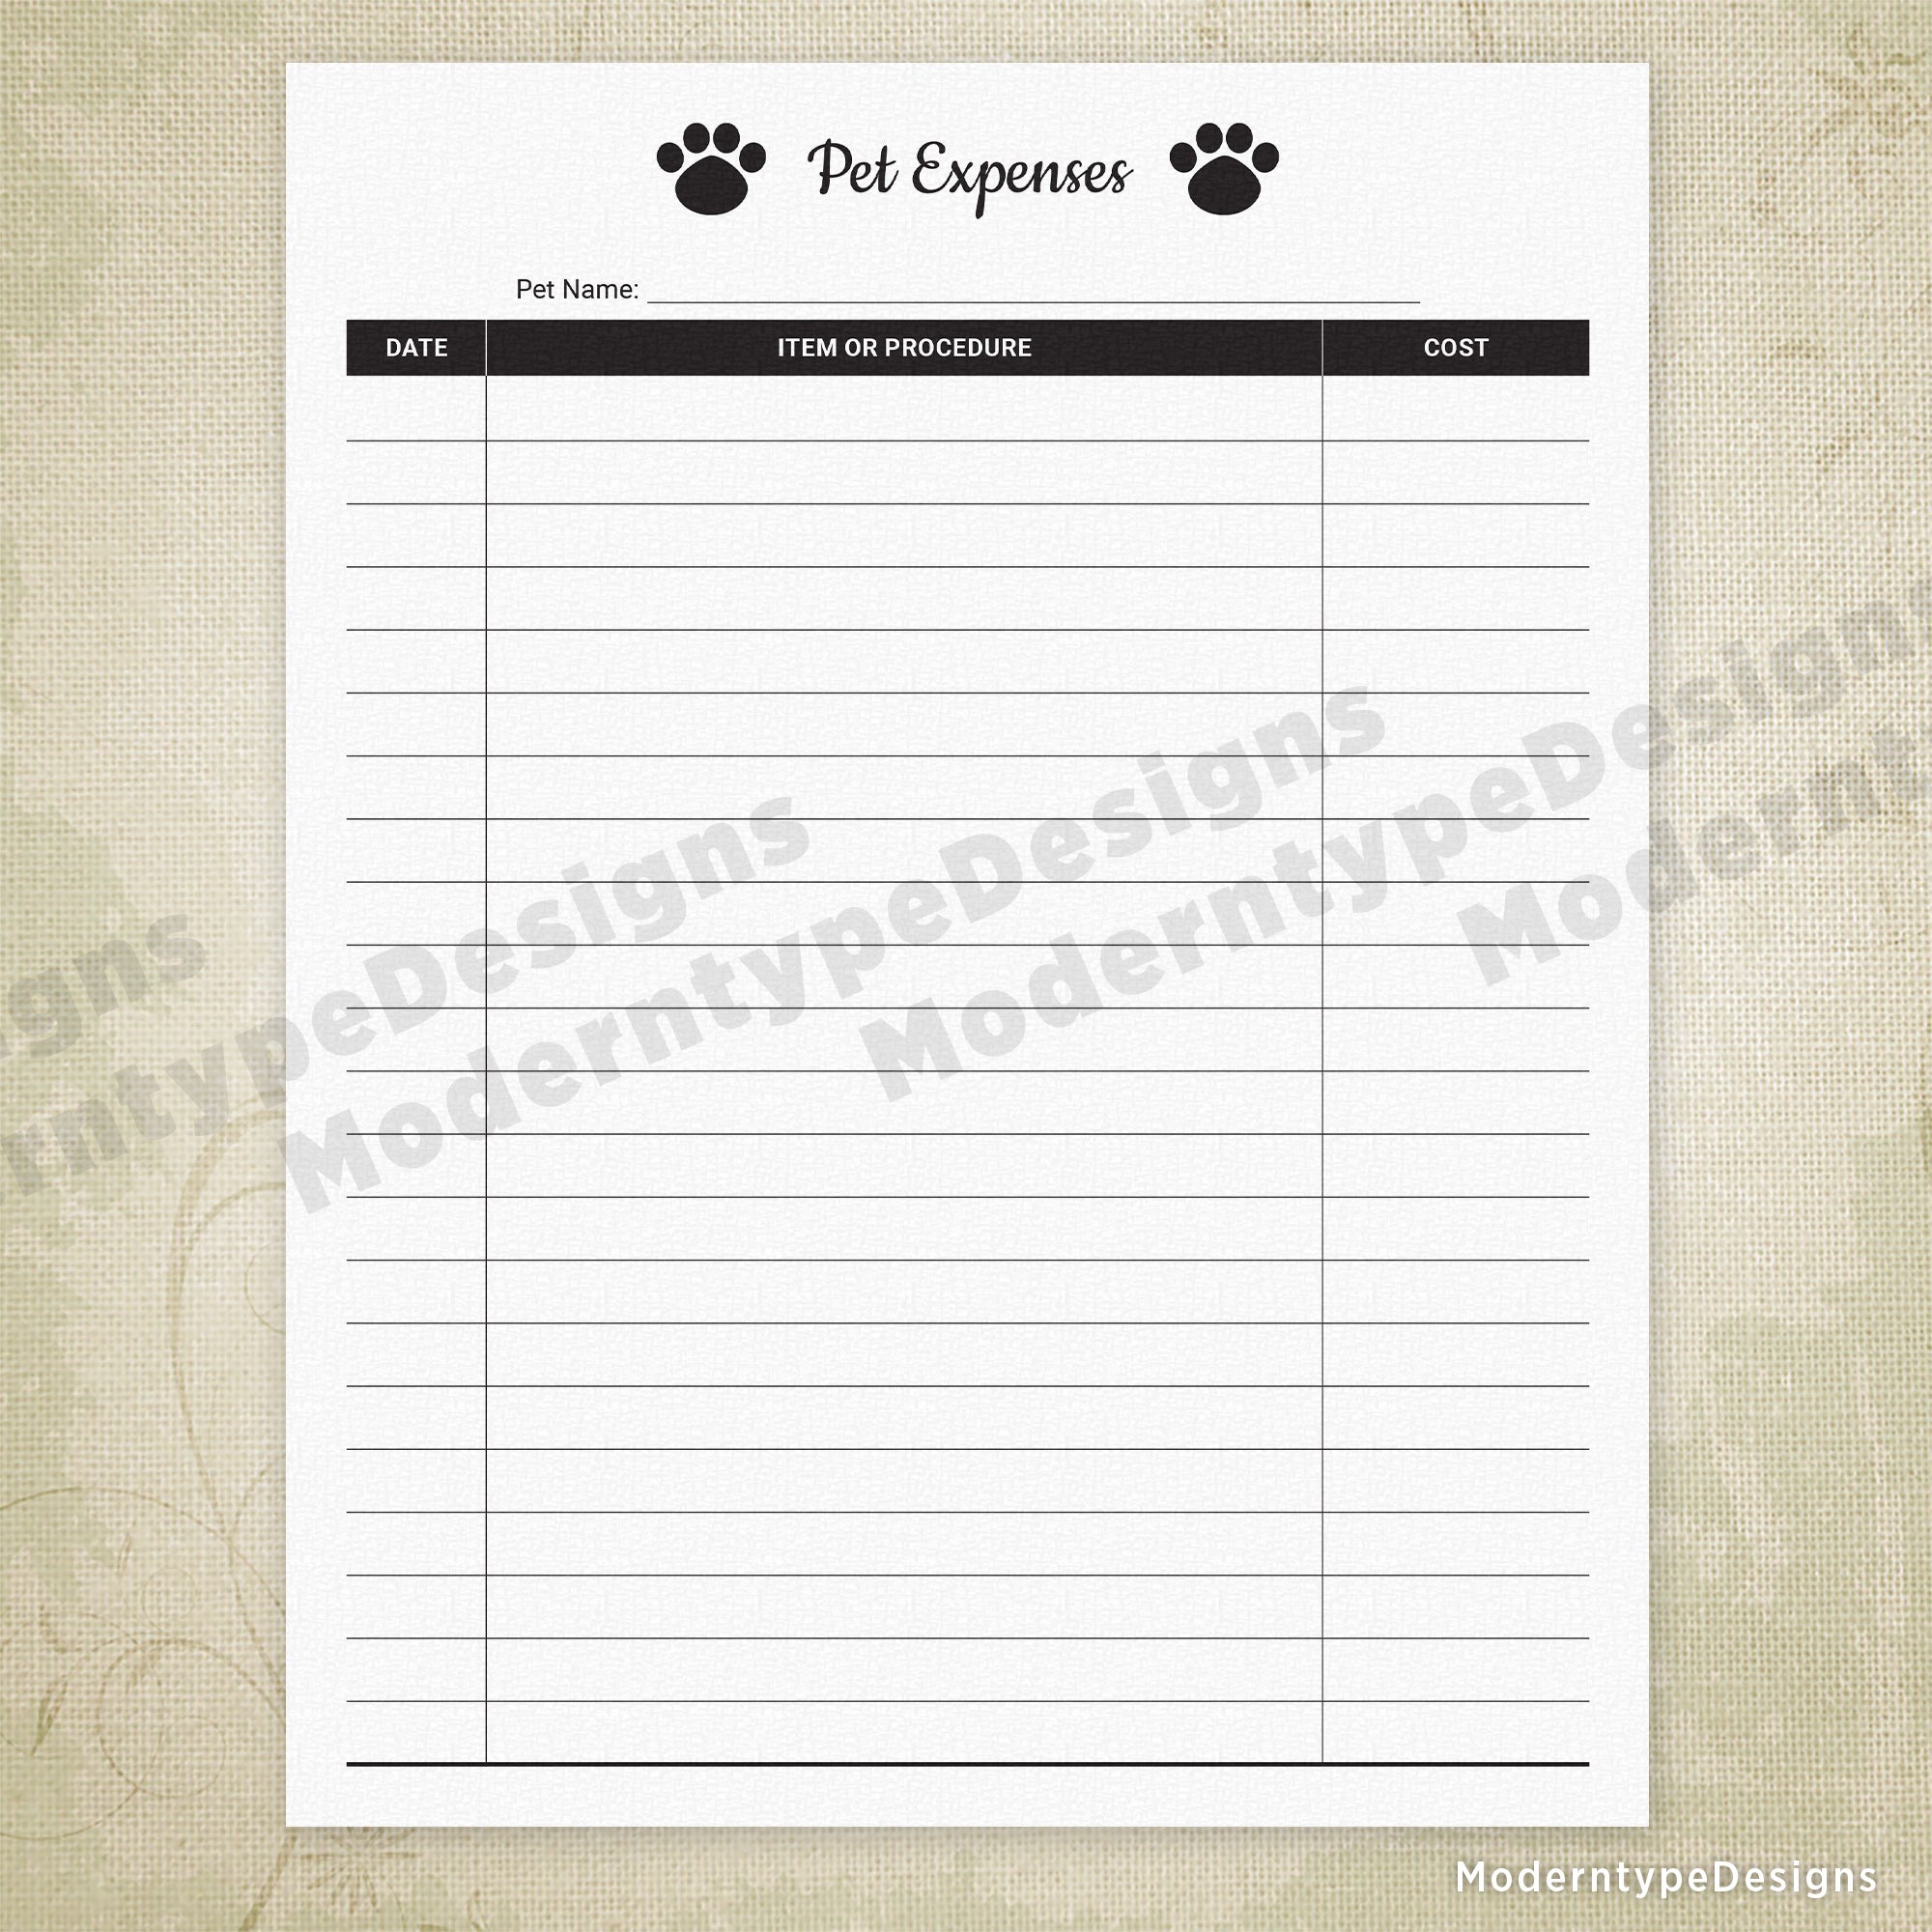 Pet Expenses Log Printable for Pet Owners